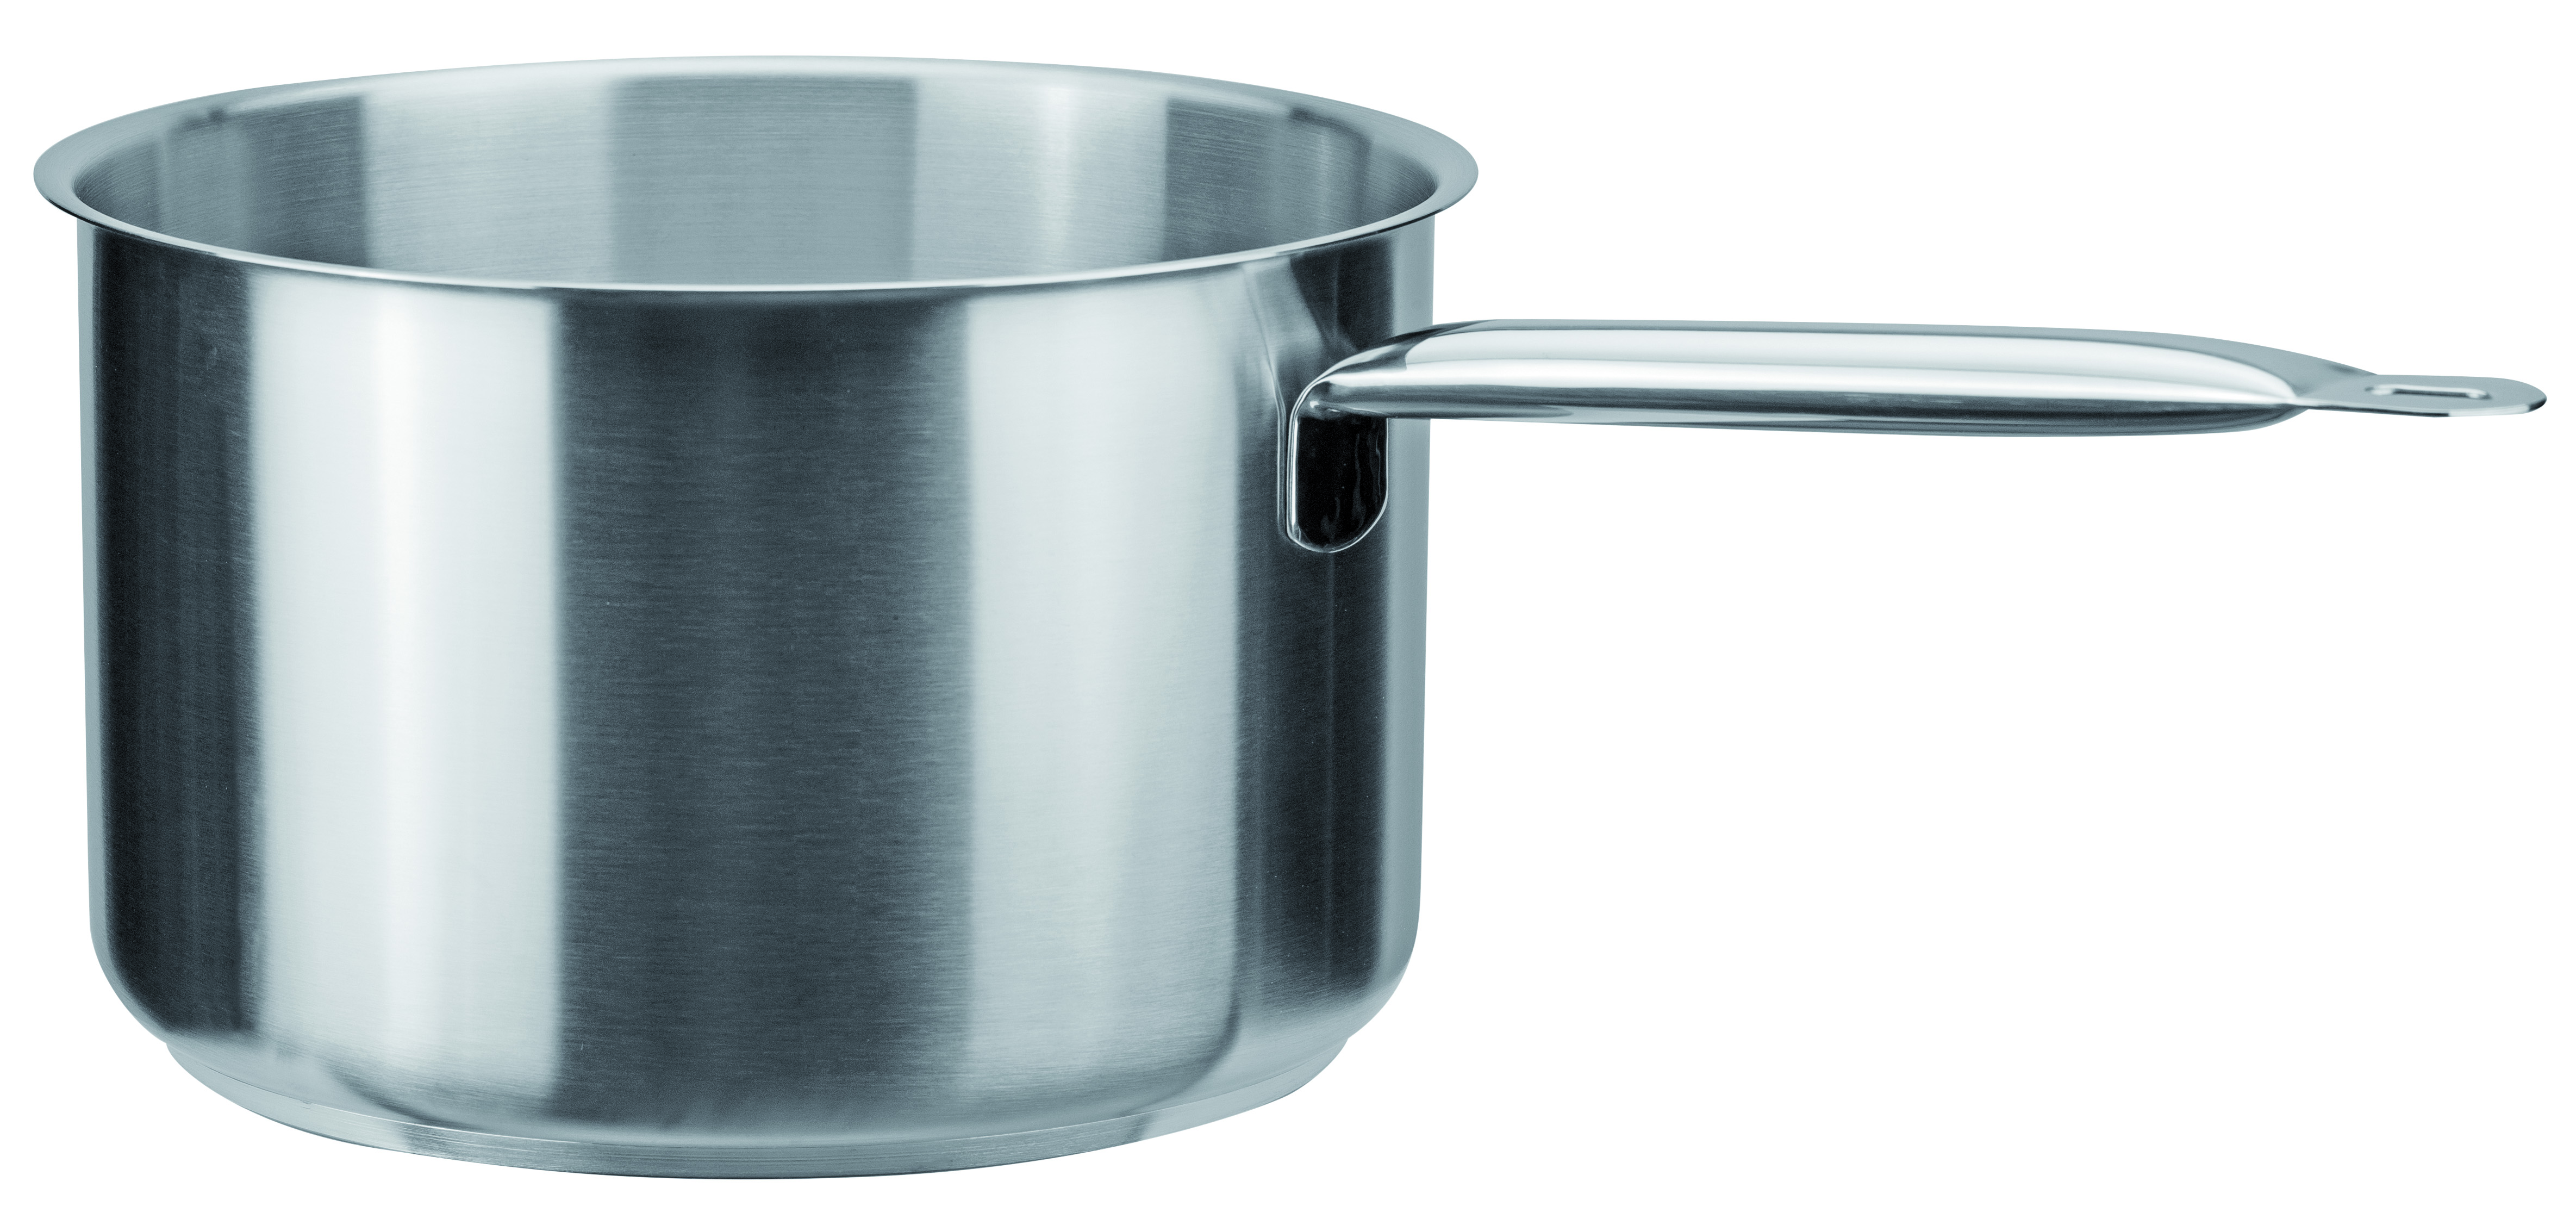 PIAZZA Stainless Steel 1 Handle Deep Cookpot - Chef Collection- diametre 20 cm